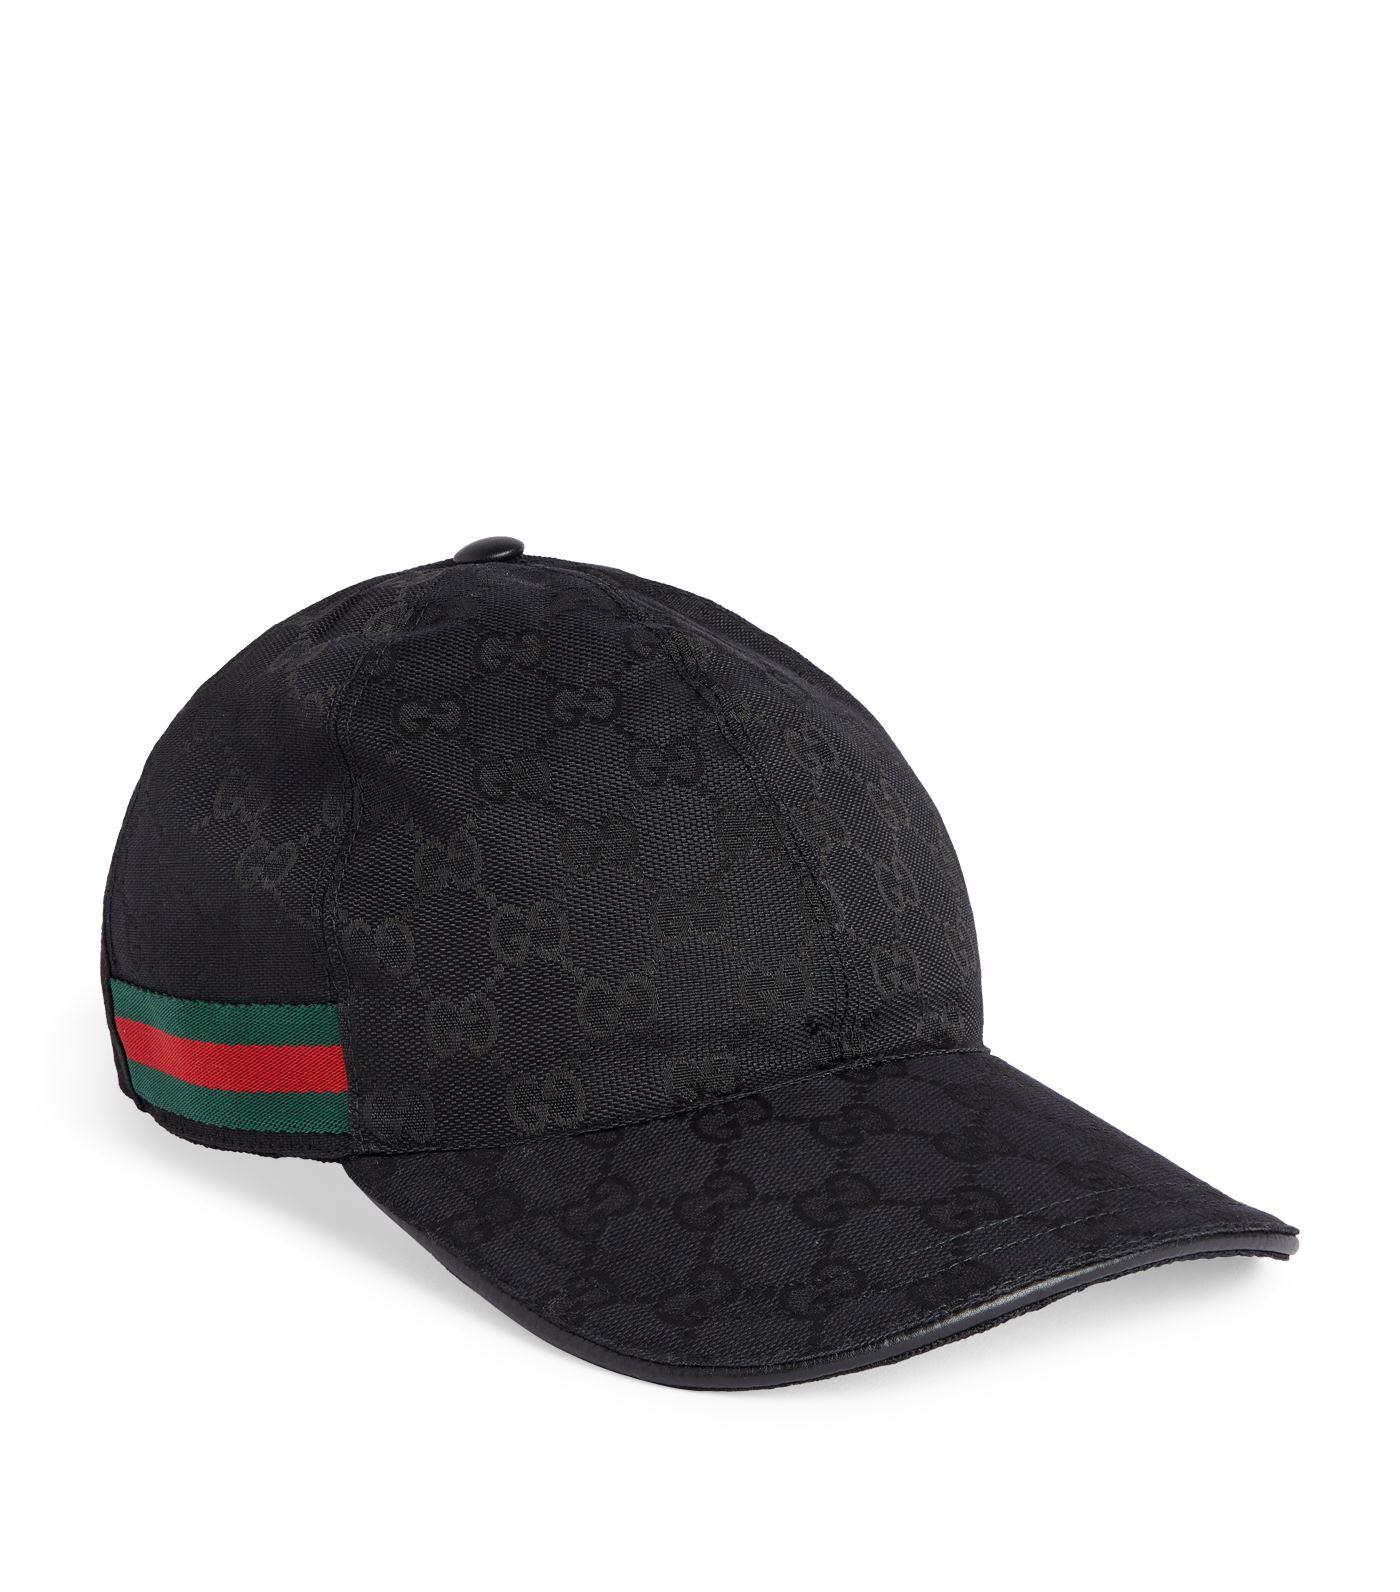 gucci hat on sale